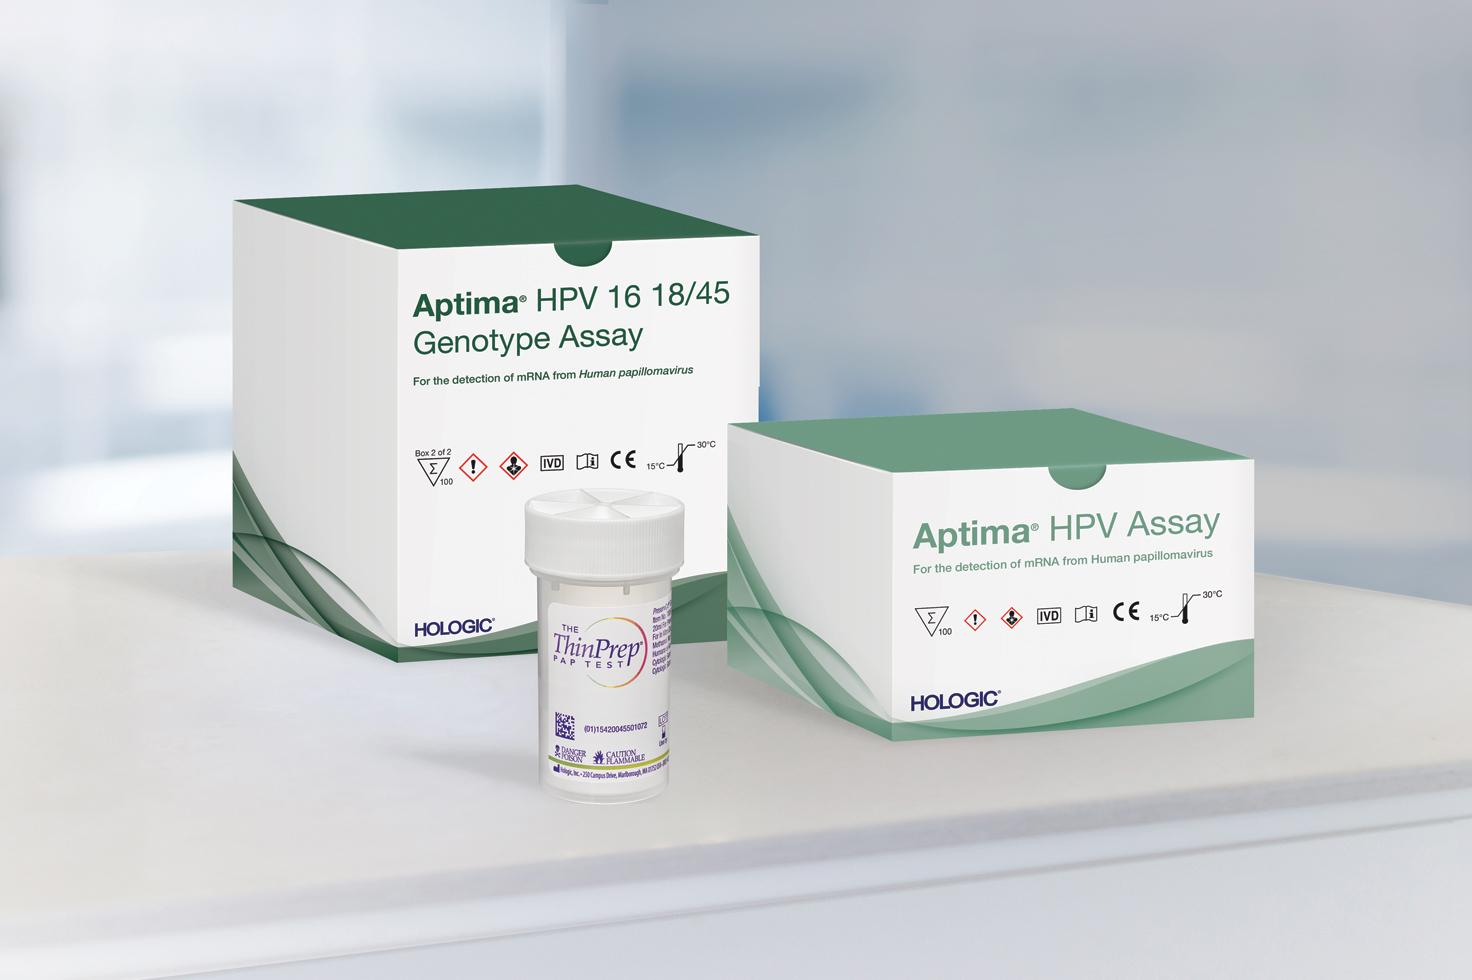 Photo of Aptima Assay products sitting on white table in a lab setting.